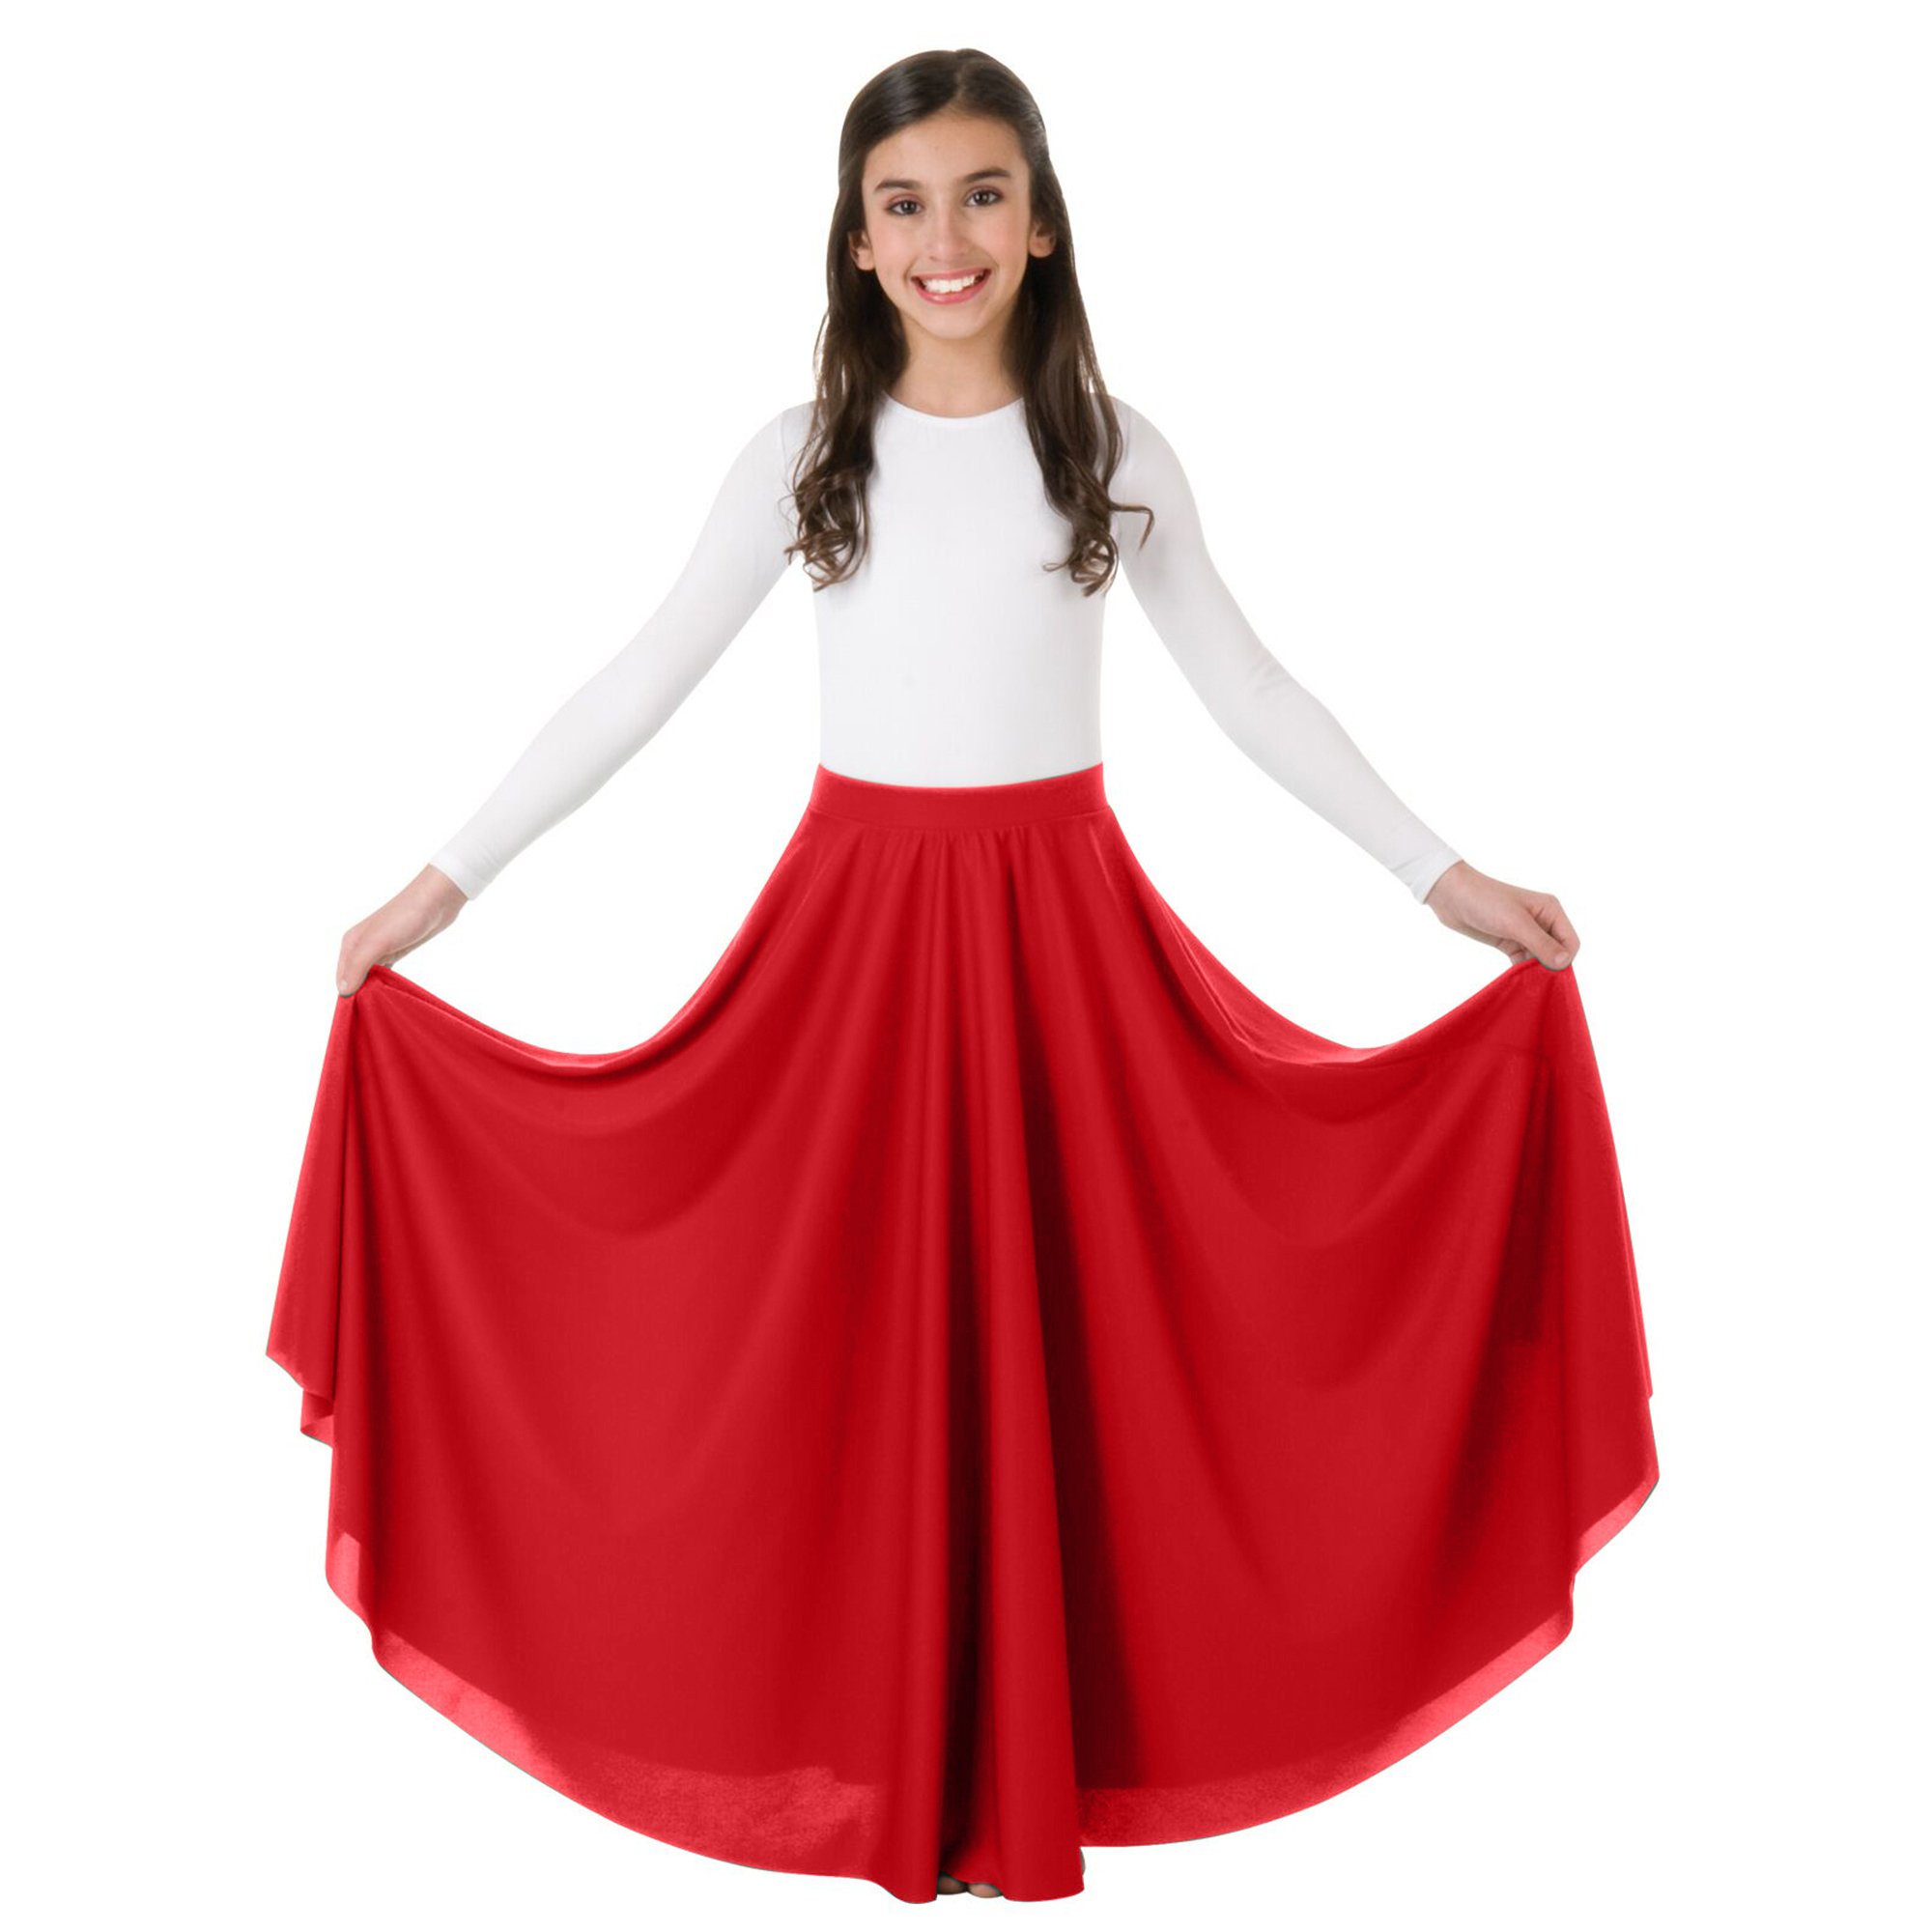 Body Wrappers Praise Dance Circle skirt - Click Image to Close